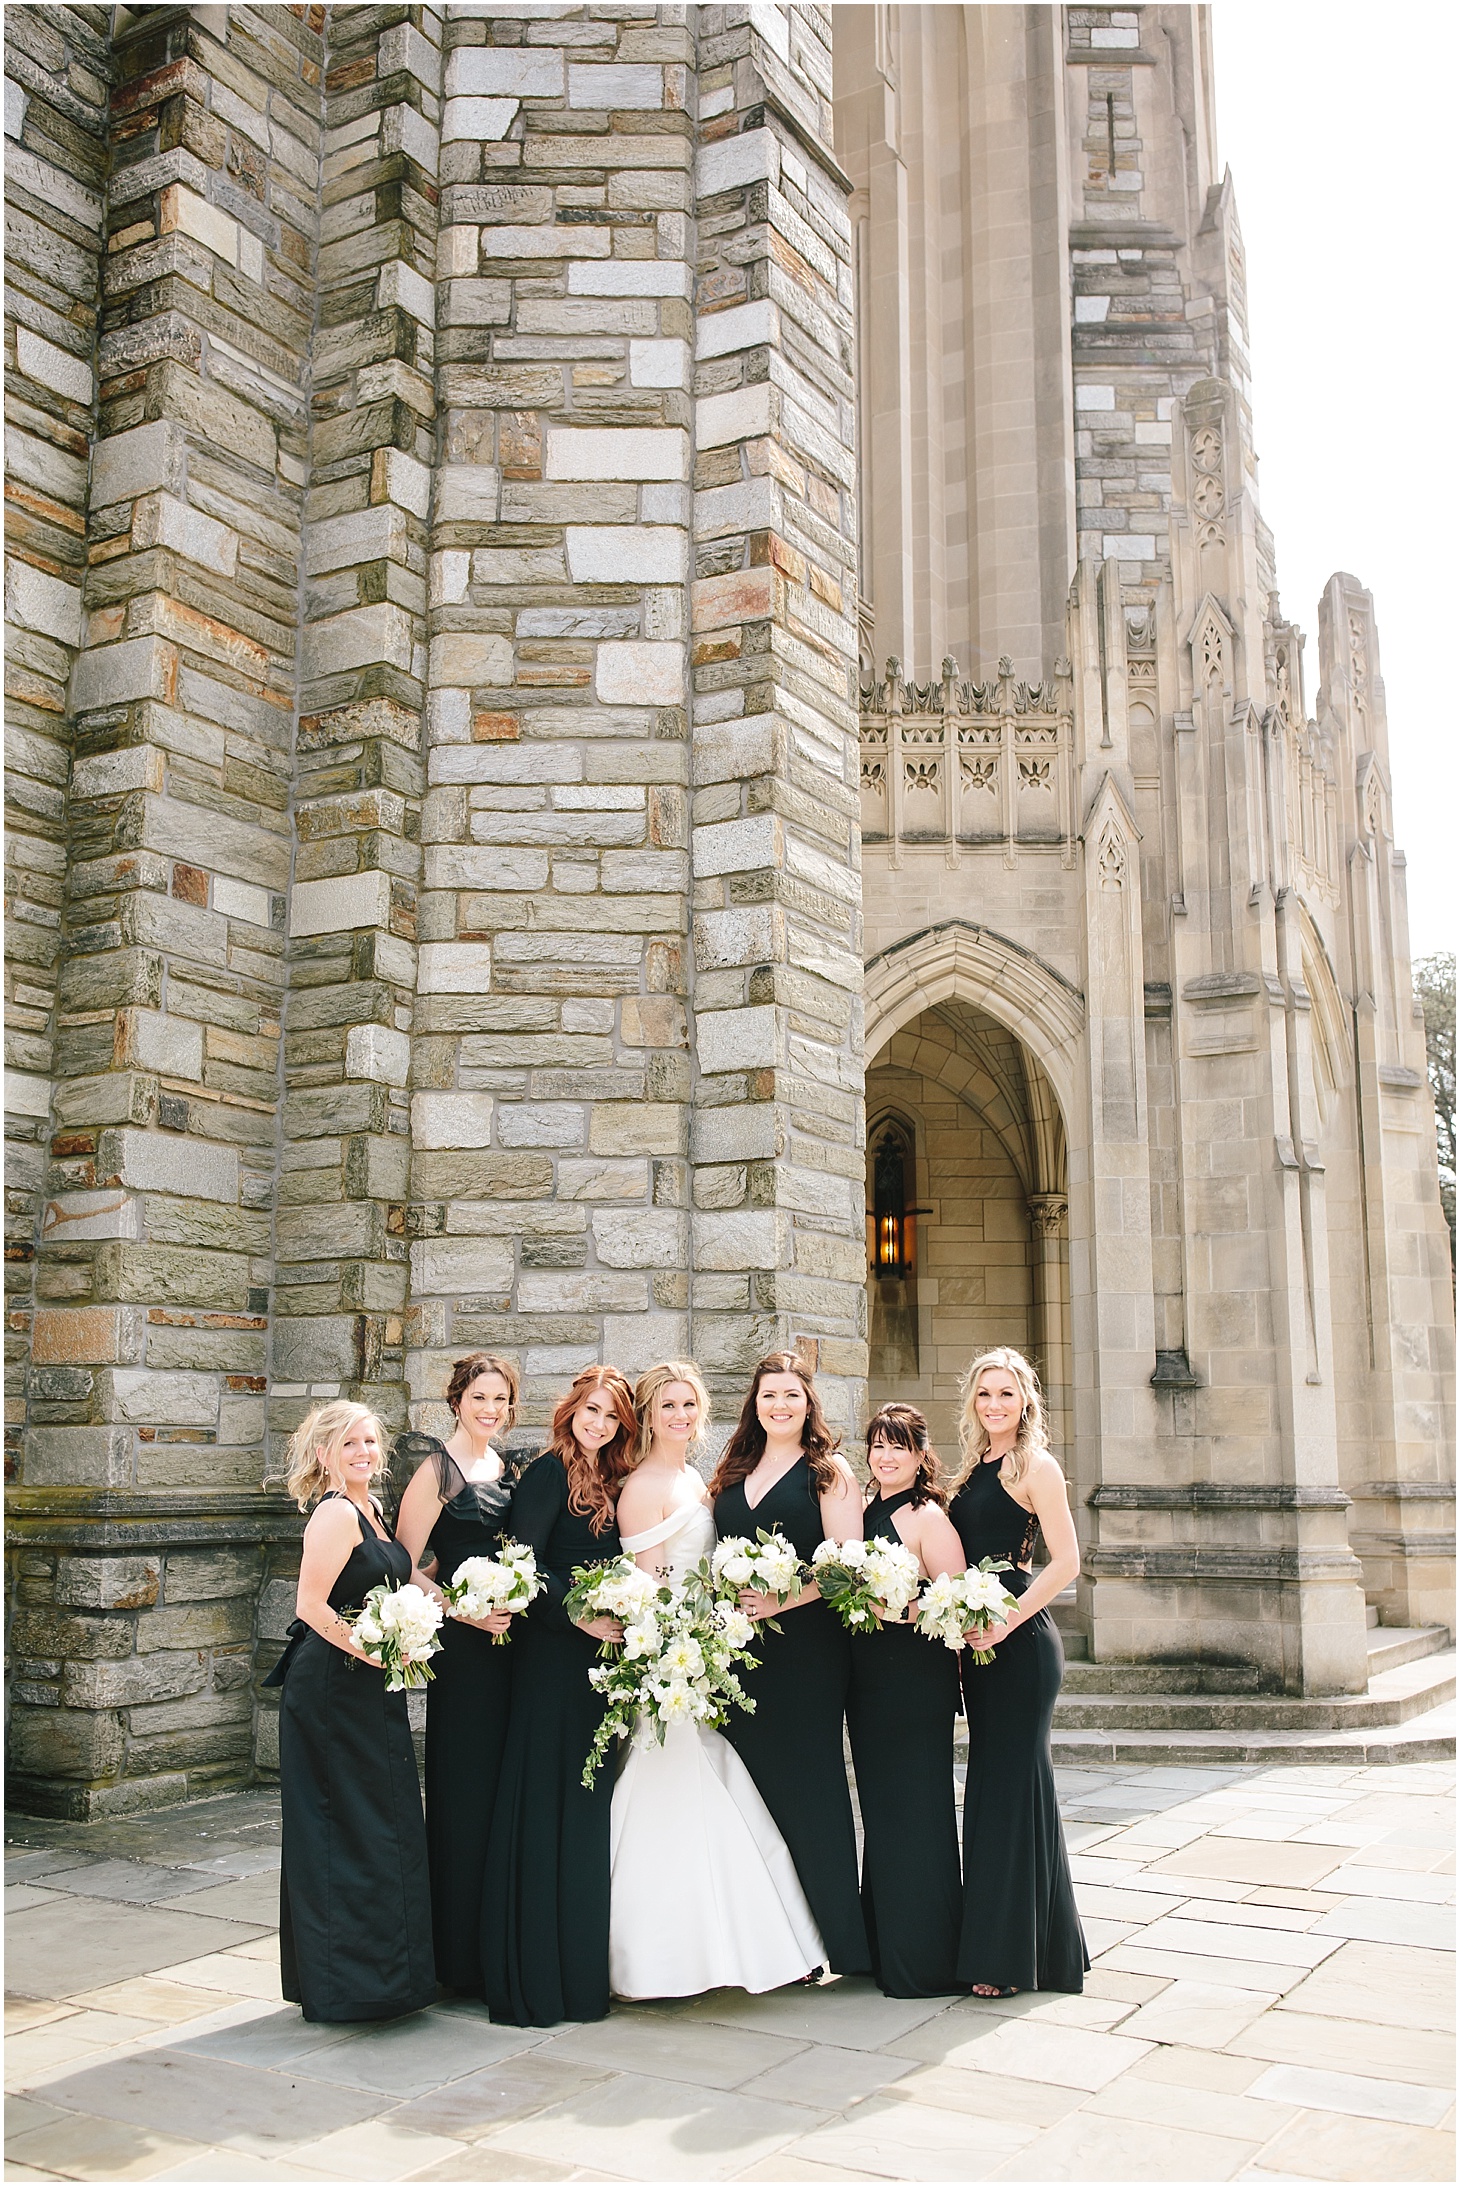 Bridal Party at the National United Methodist Church, Modern Spring Wedding at The LINE Hotel DC, Wedding Ceremony at National United Methodist Church, Sarah Bradshaw Photography, DC Wedding Photographer